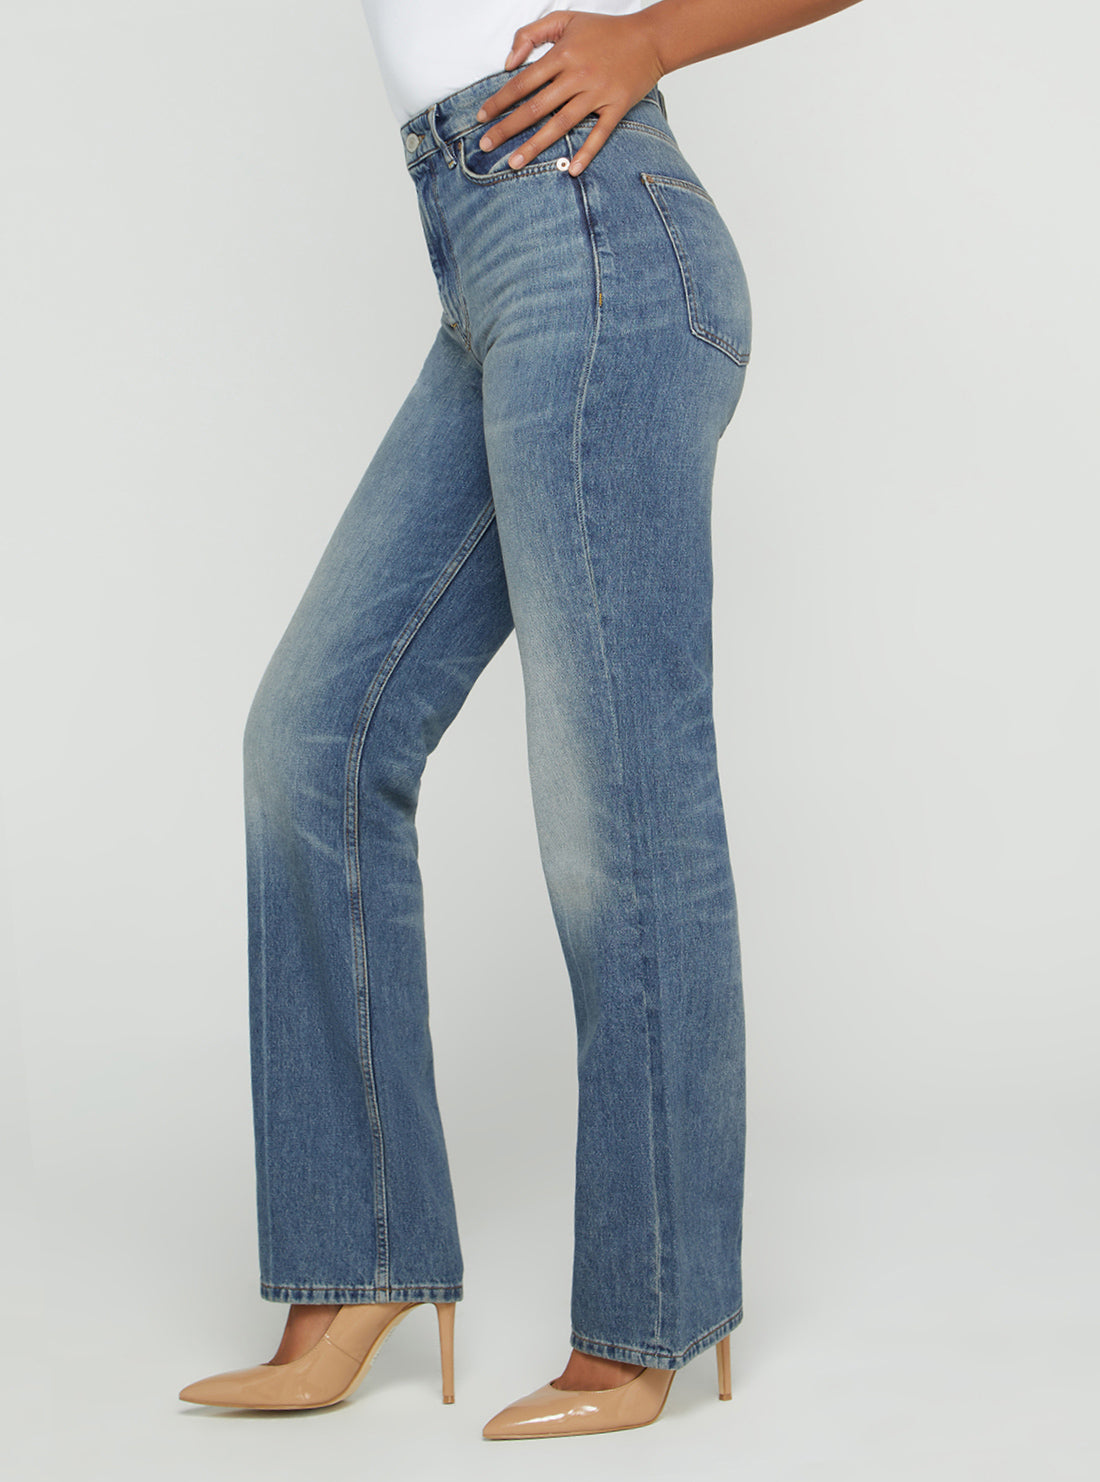 GUESS Women's High-Rise 80s Straight Leg Denim Jeans In Confidence Wash Side View